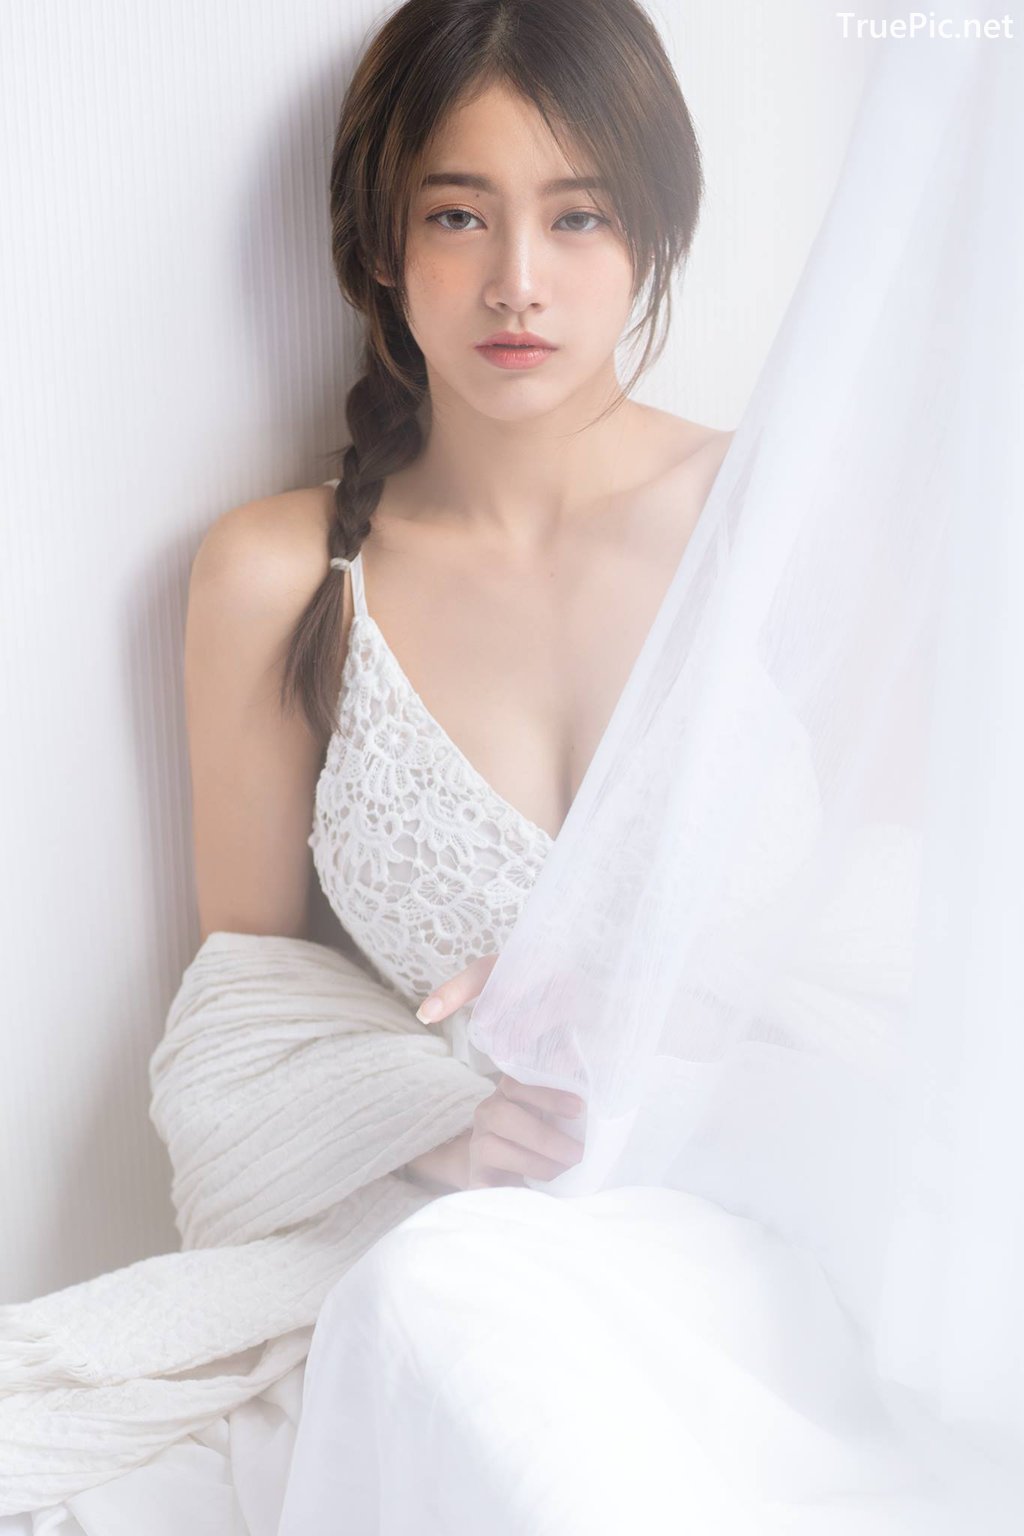 Image Thailand Model - Pimploy Chitranapawong - Beautiful In White - TruePic.net - Picture-25